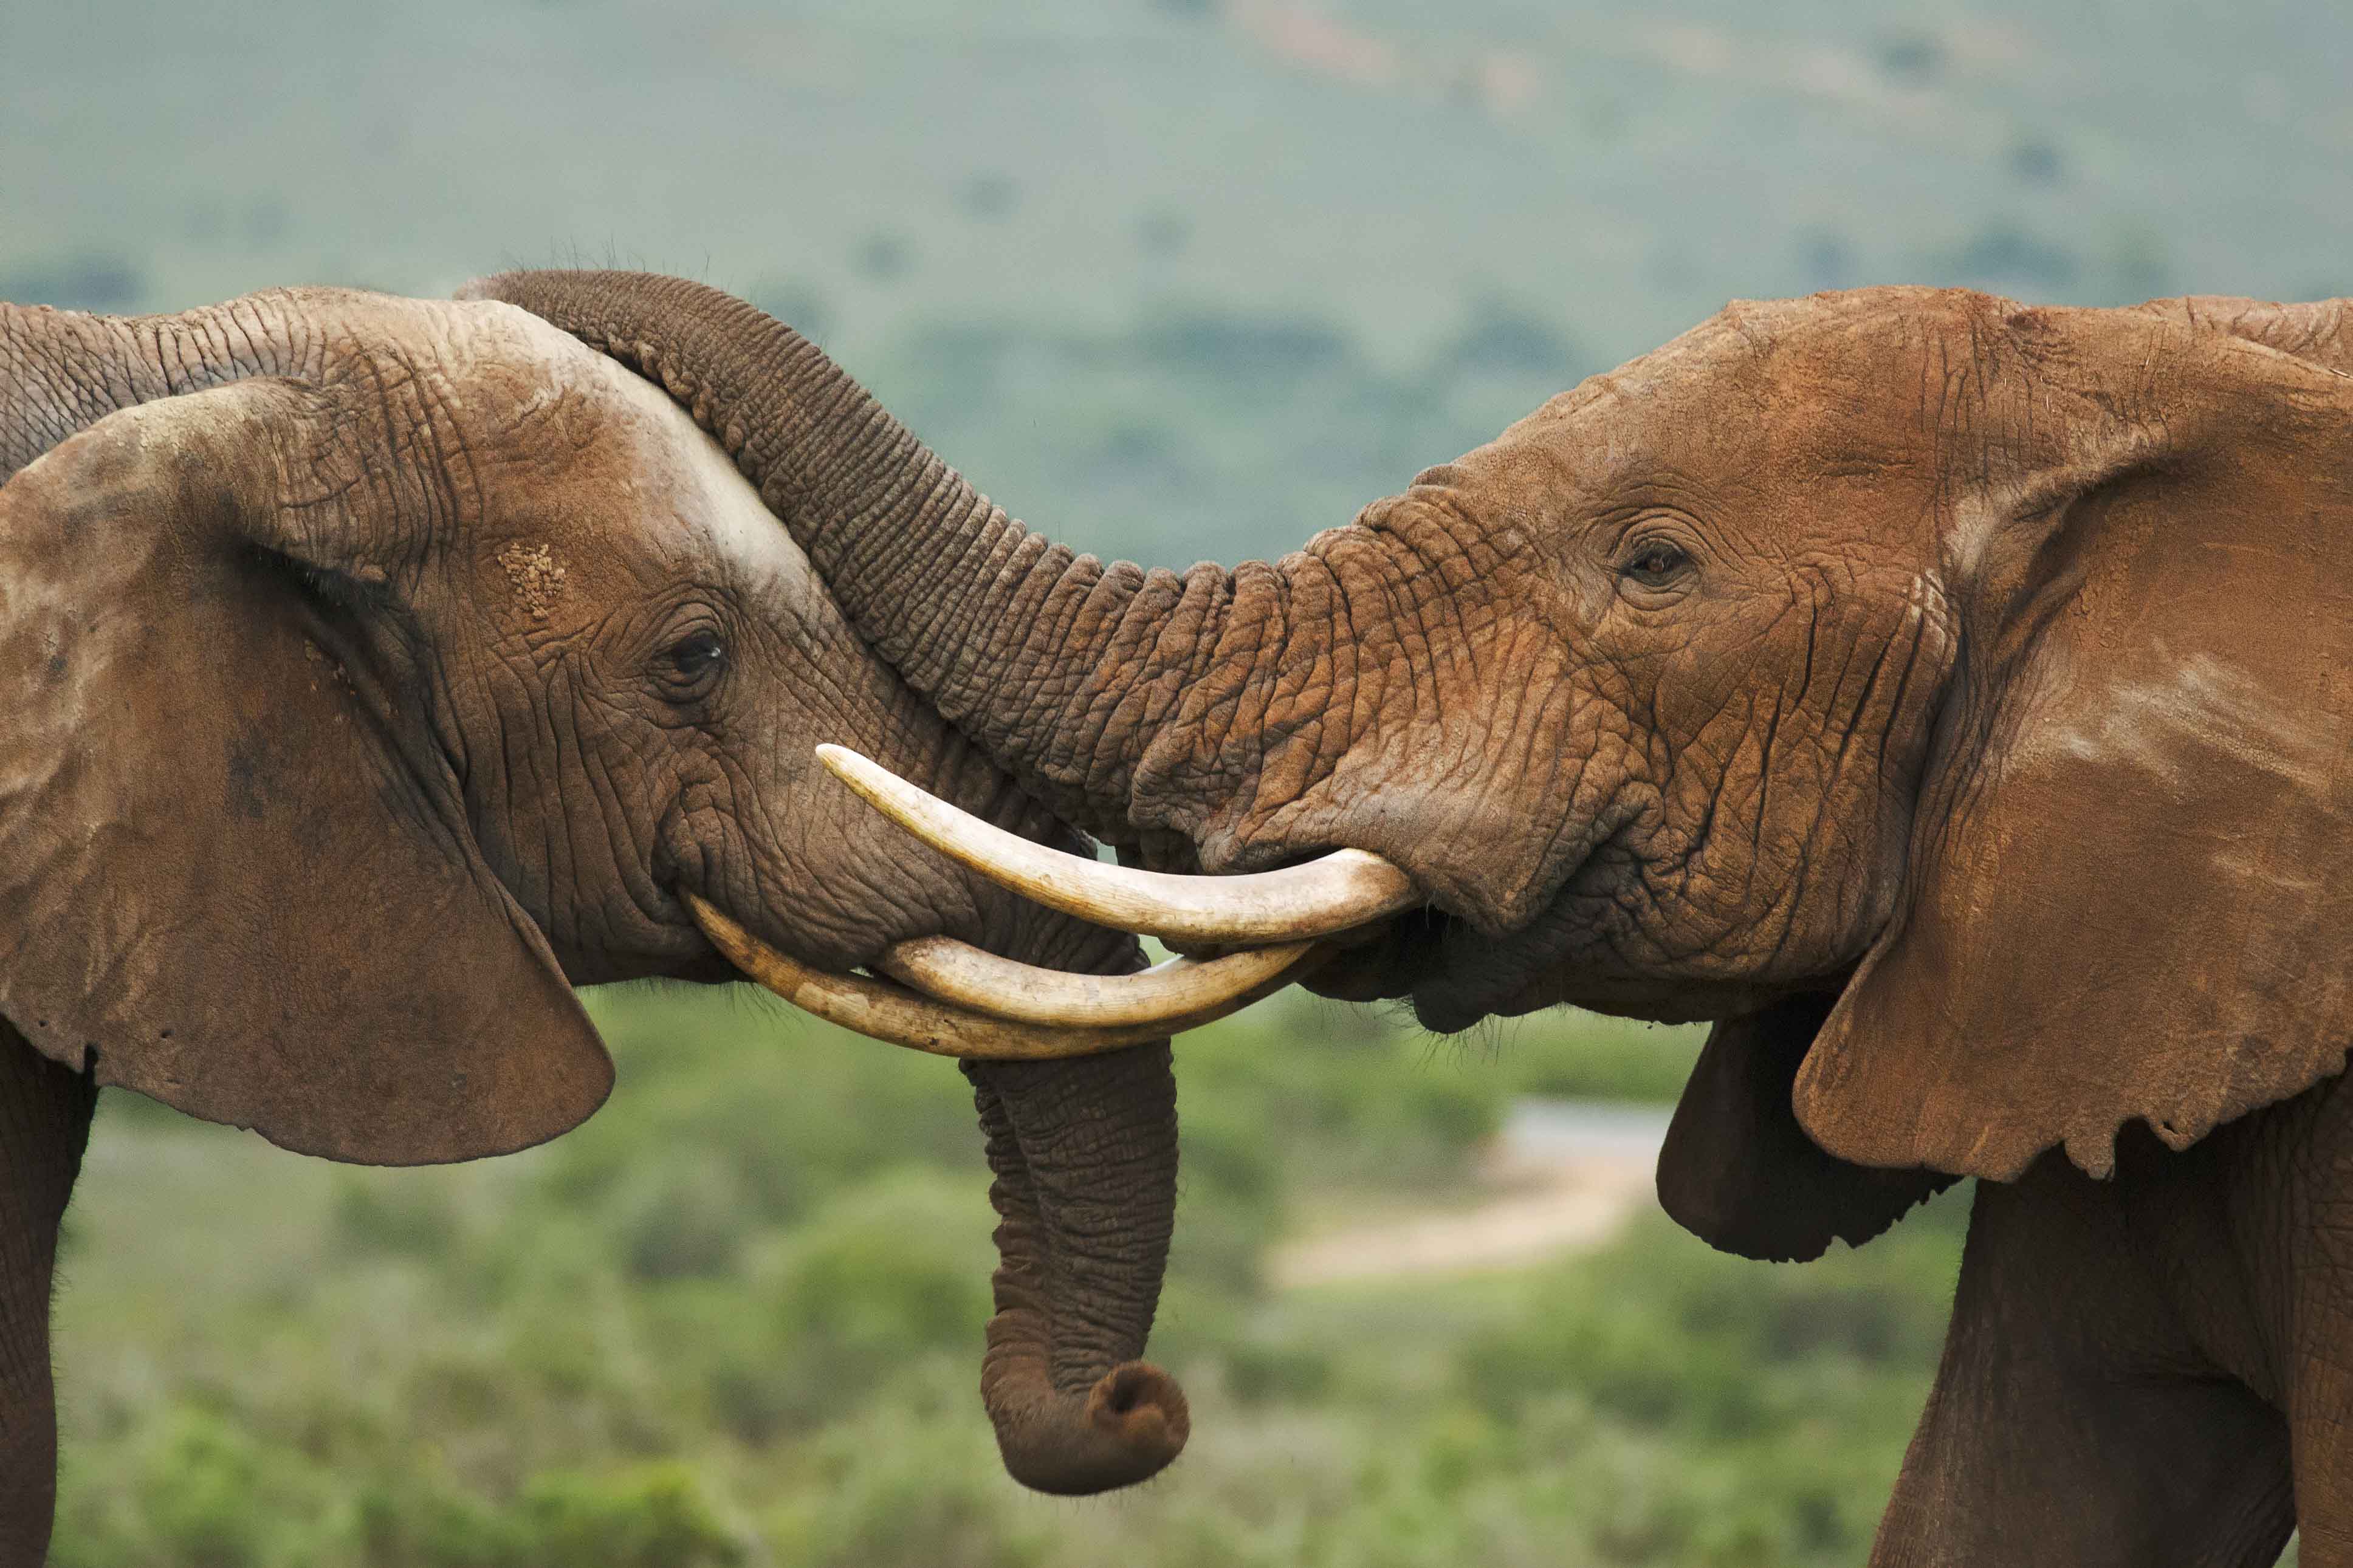 Two elephants up close with one another.